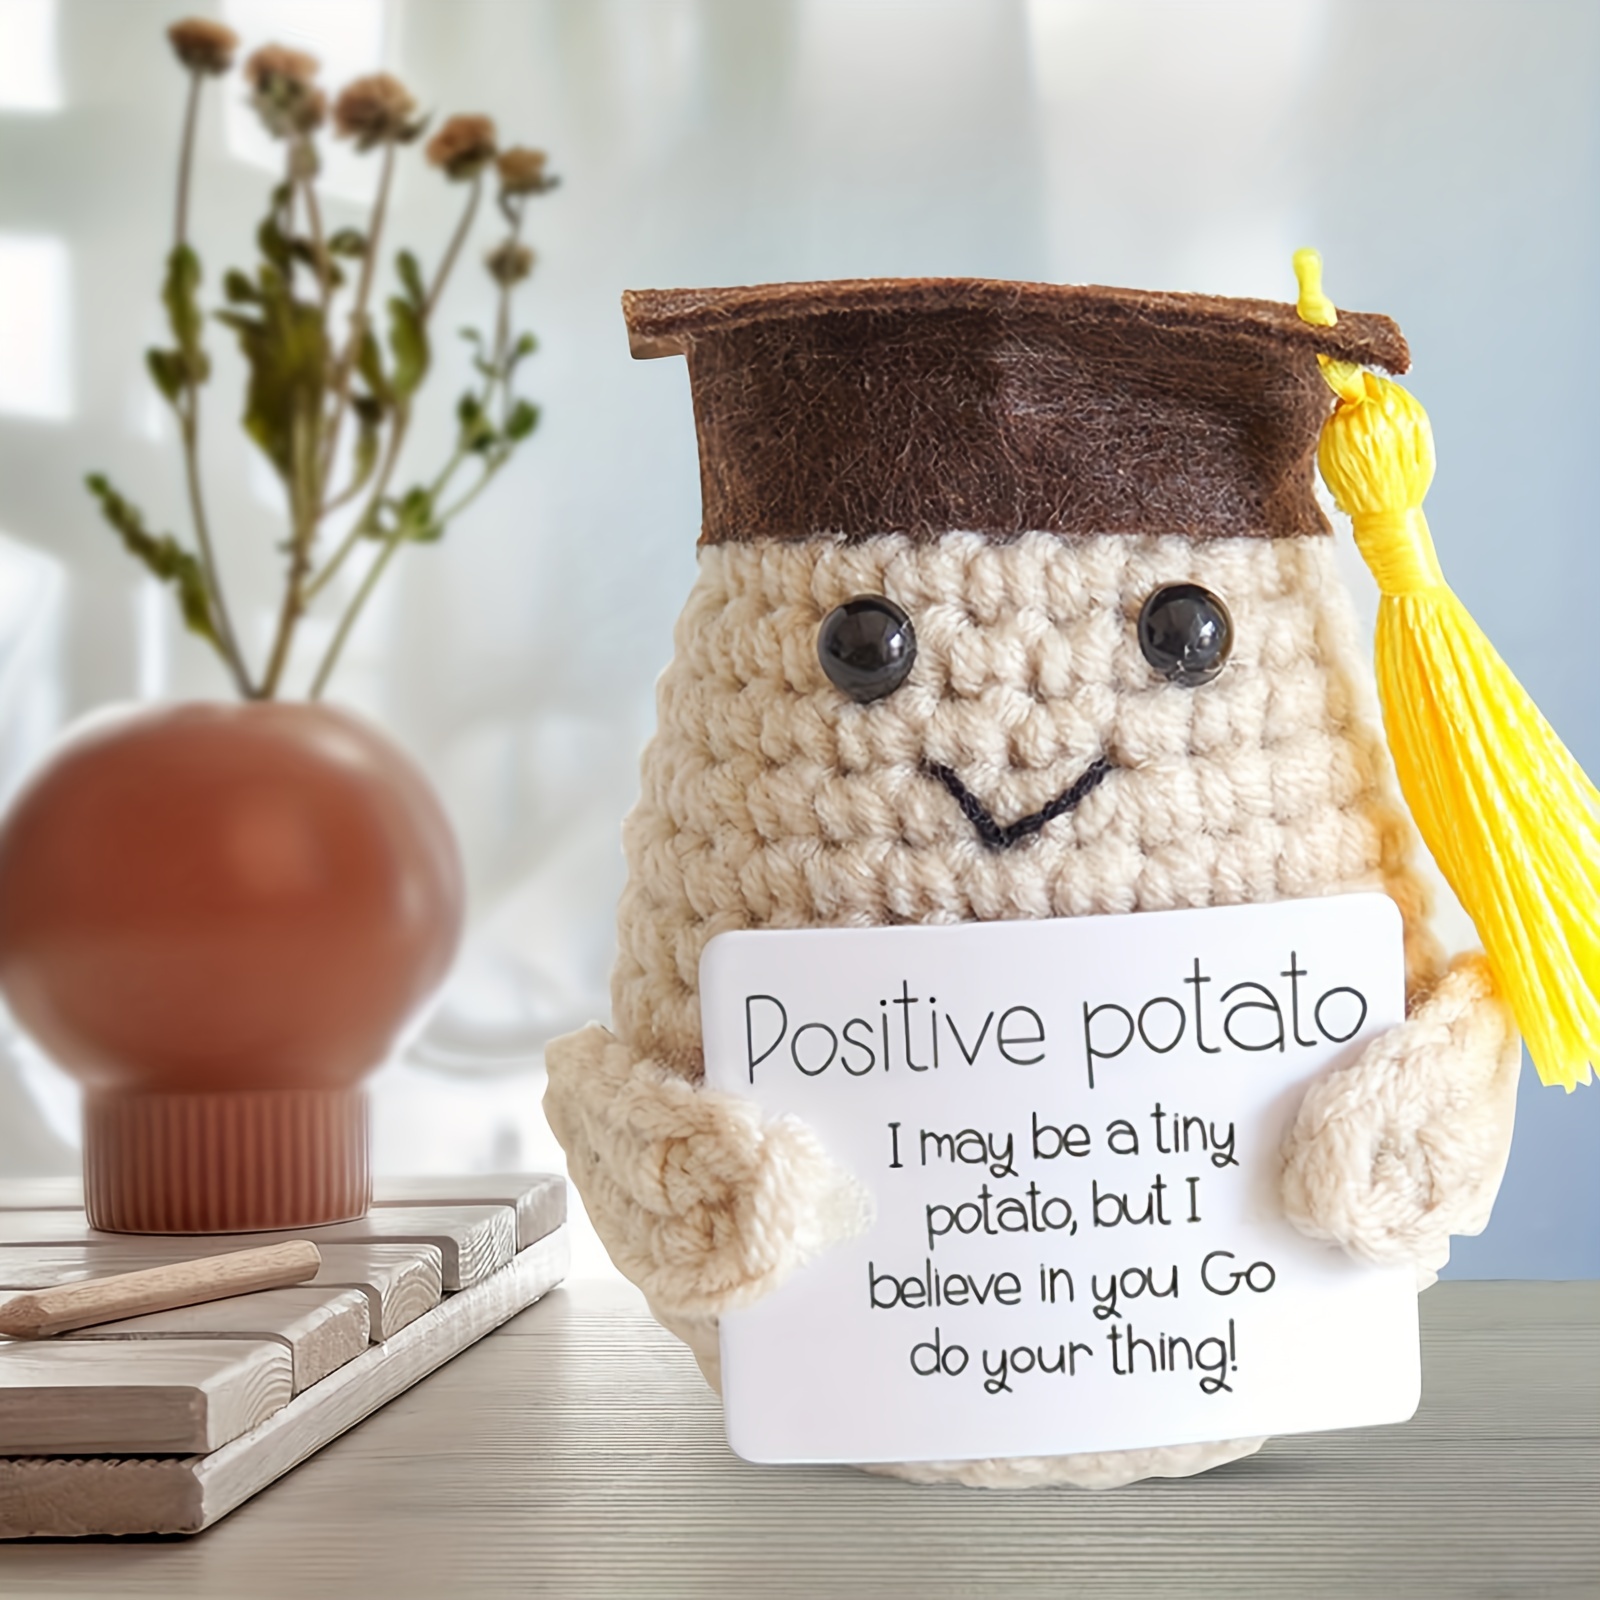  utosday Funny Positive Potato, 3 inch Cute Crochet Positive  Potato Doll with Positive Card, Wool Knitting Emotional Support Positive  Life Potato for Christmas Ornaments Gift Room Decor : Toys & Games